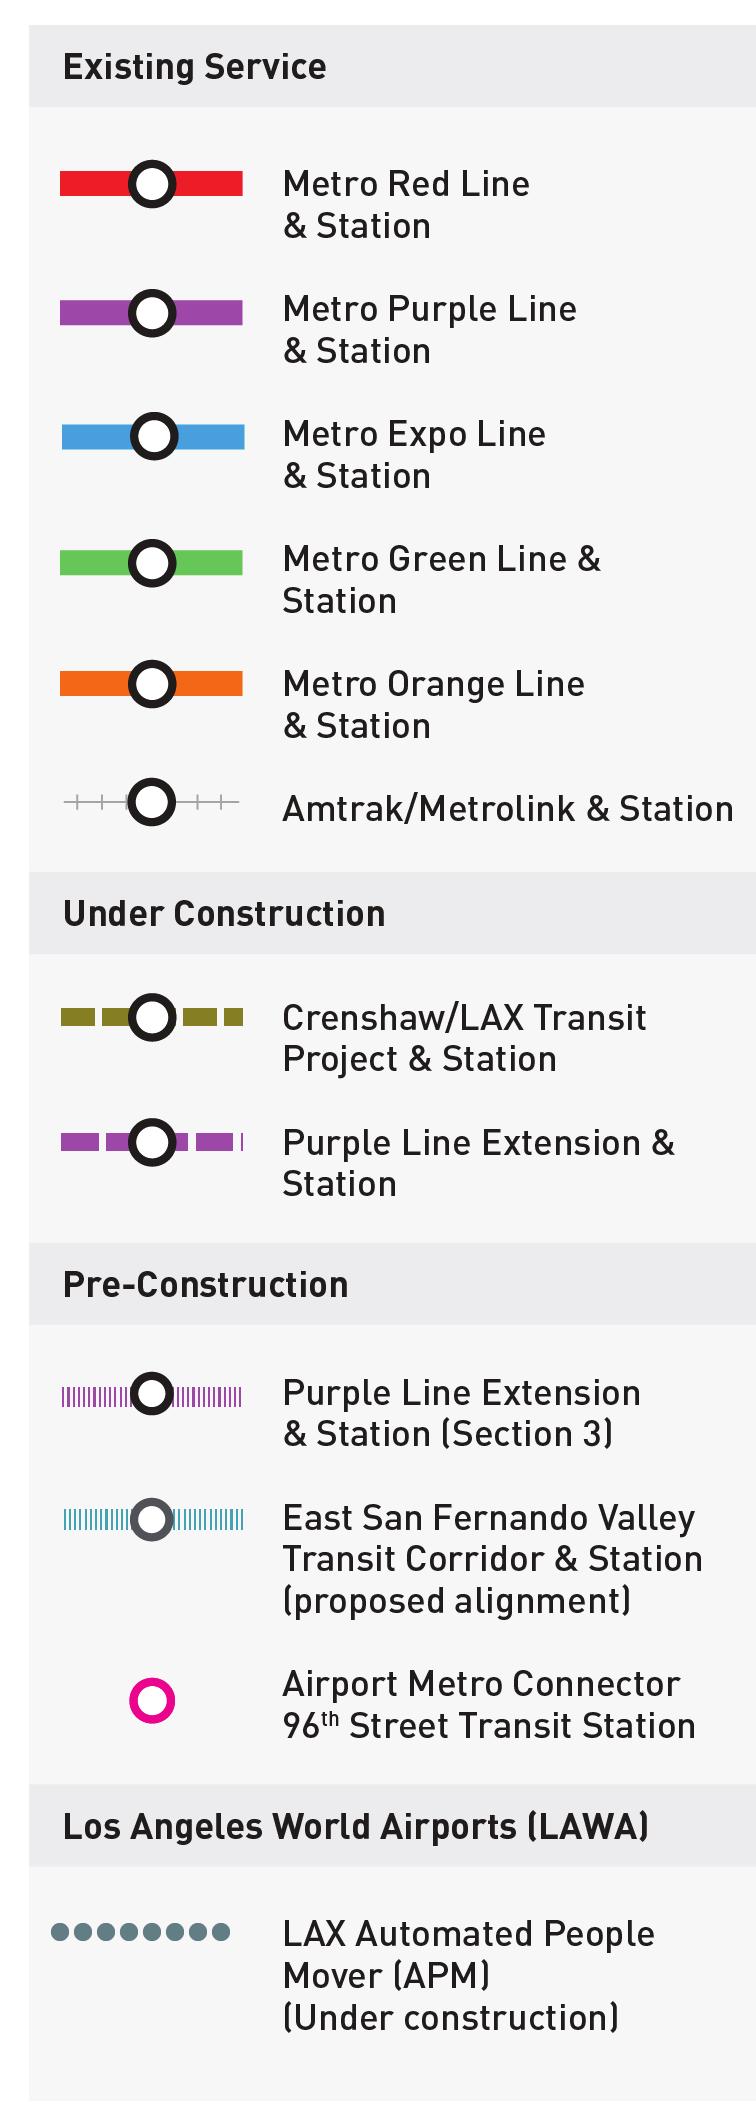 Related Projects North San Fernando Valley BRT (Alignment TBD) Countywide Bus Rapid Transit (BRT)